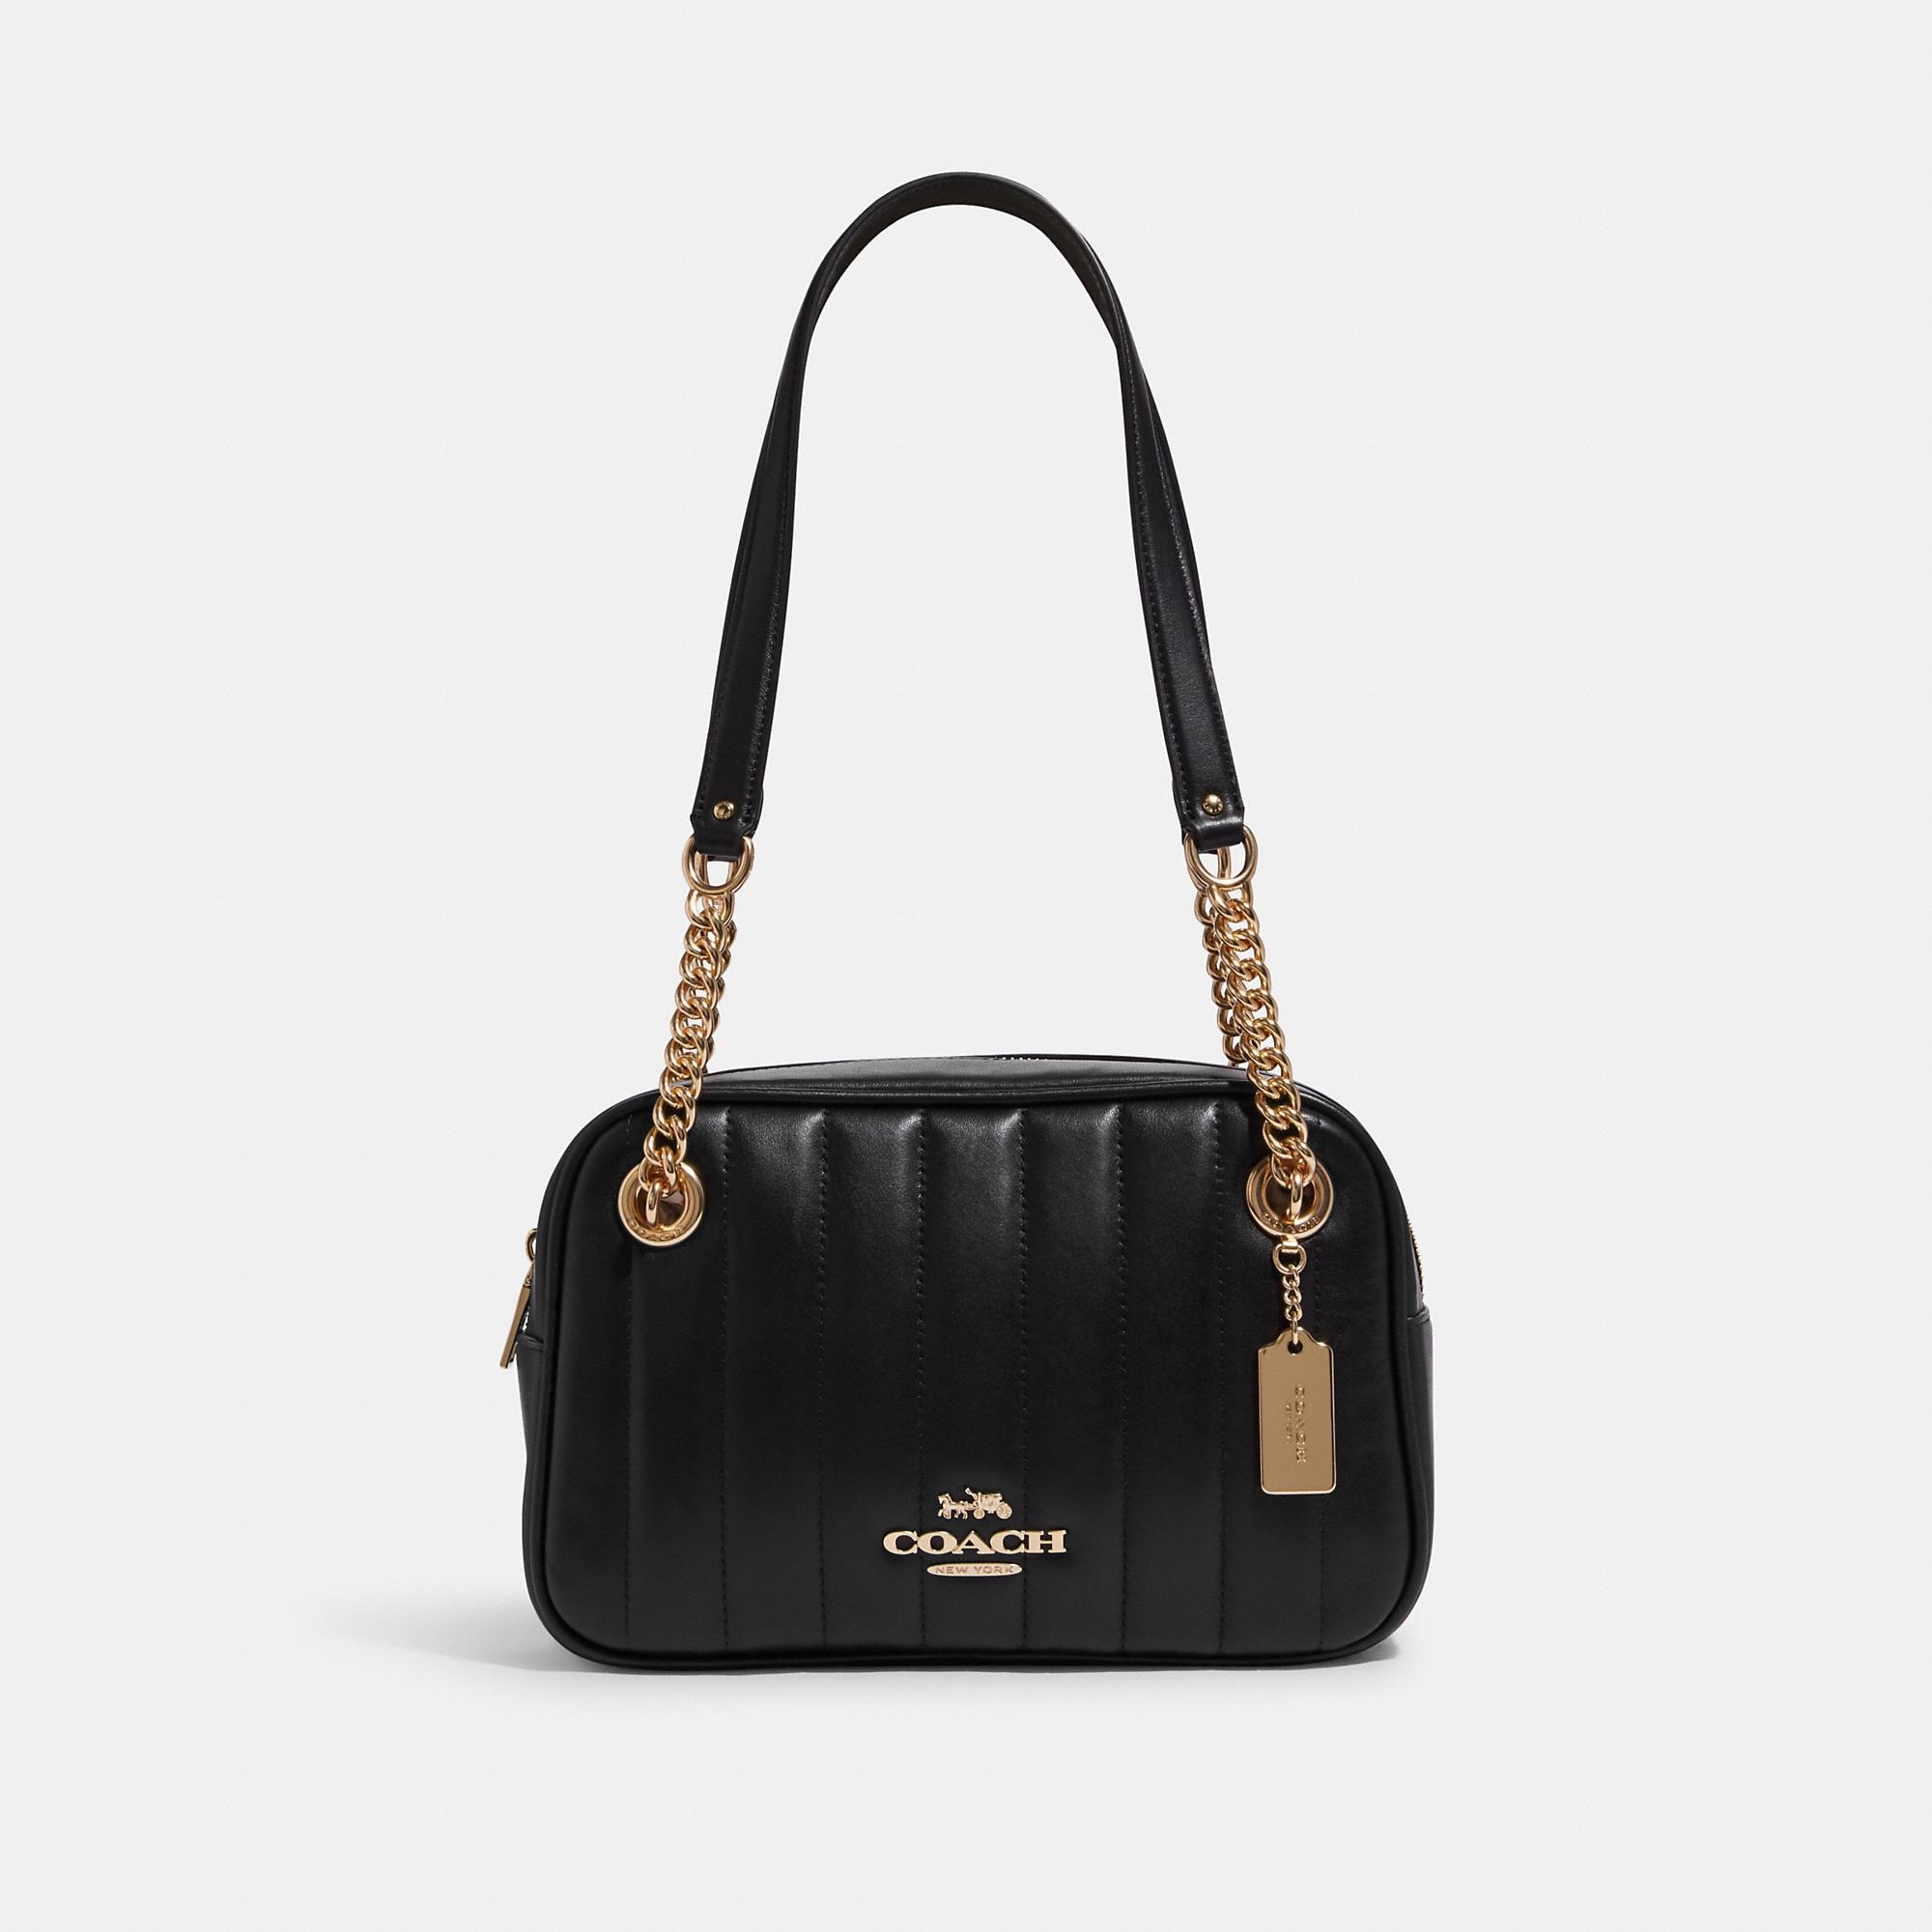 Coach Outlet Cammie Chain Shoulder Bag With Linear Quilting in Black